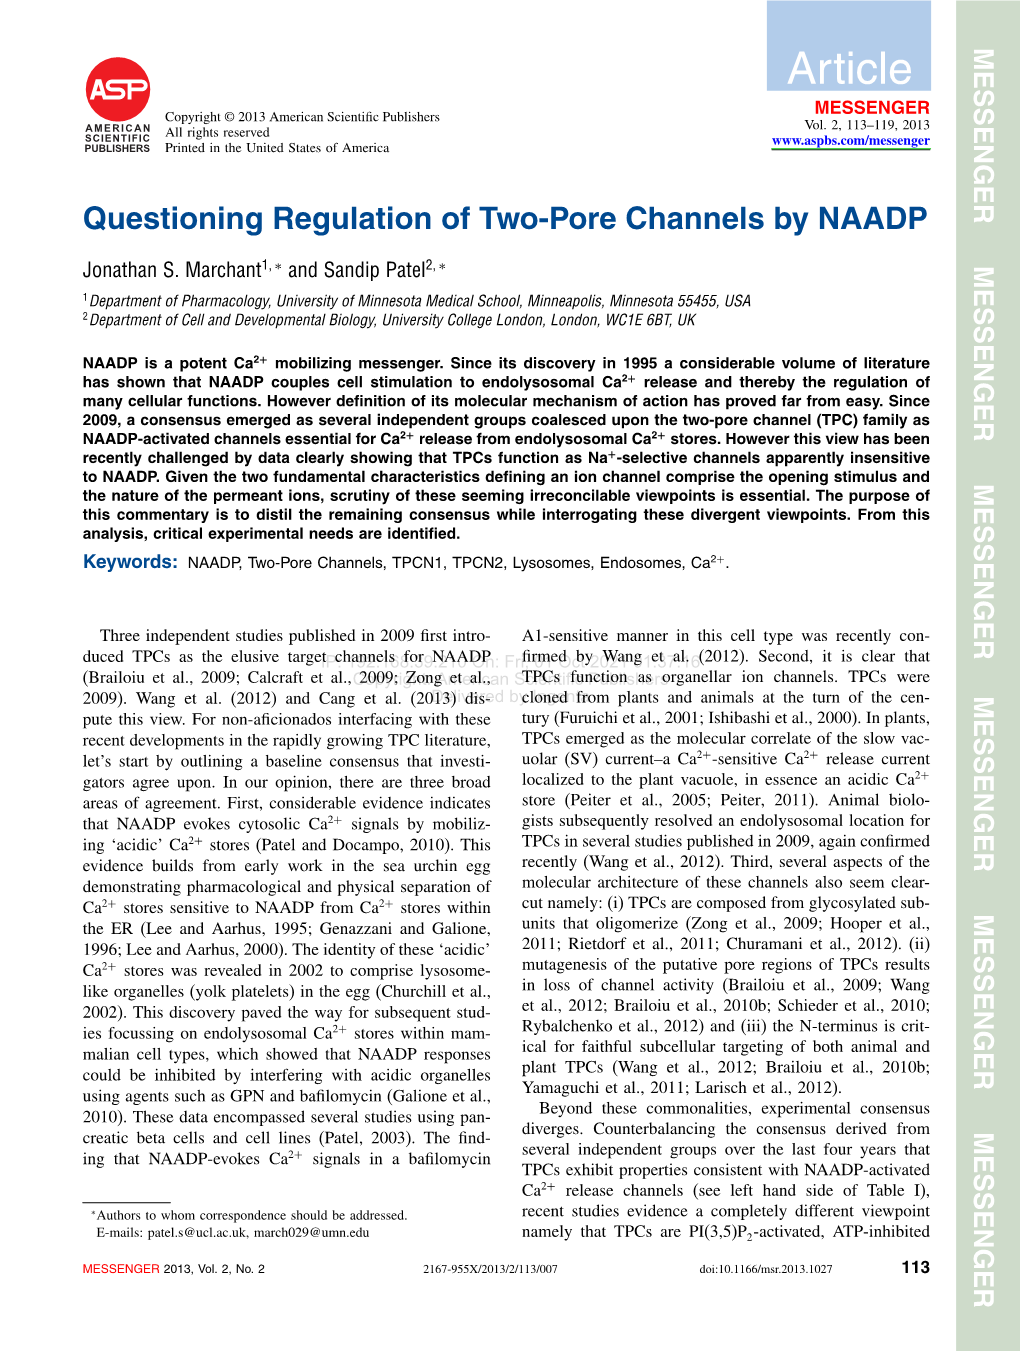 Questioning Regulation of Two-Pore Channels by NAADP